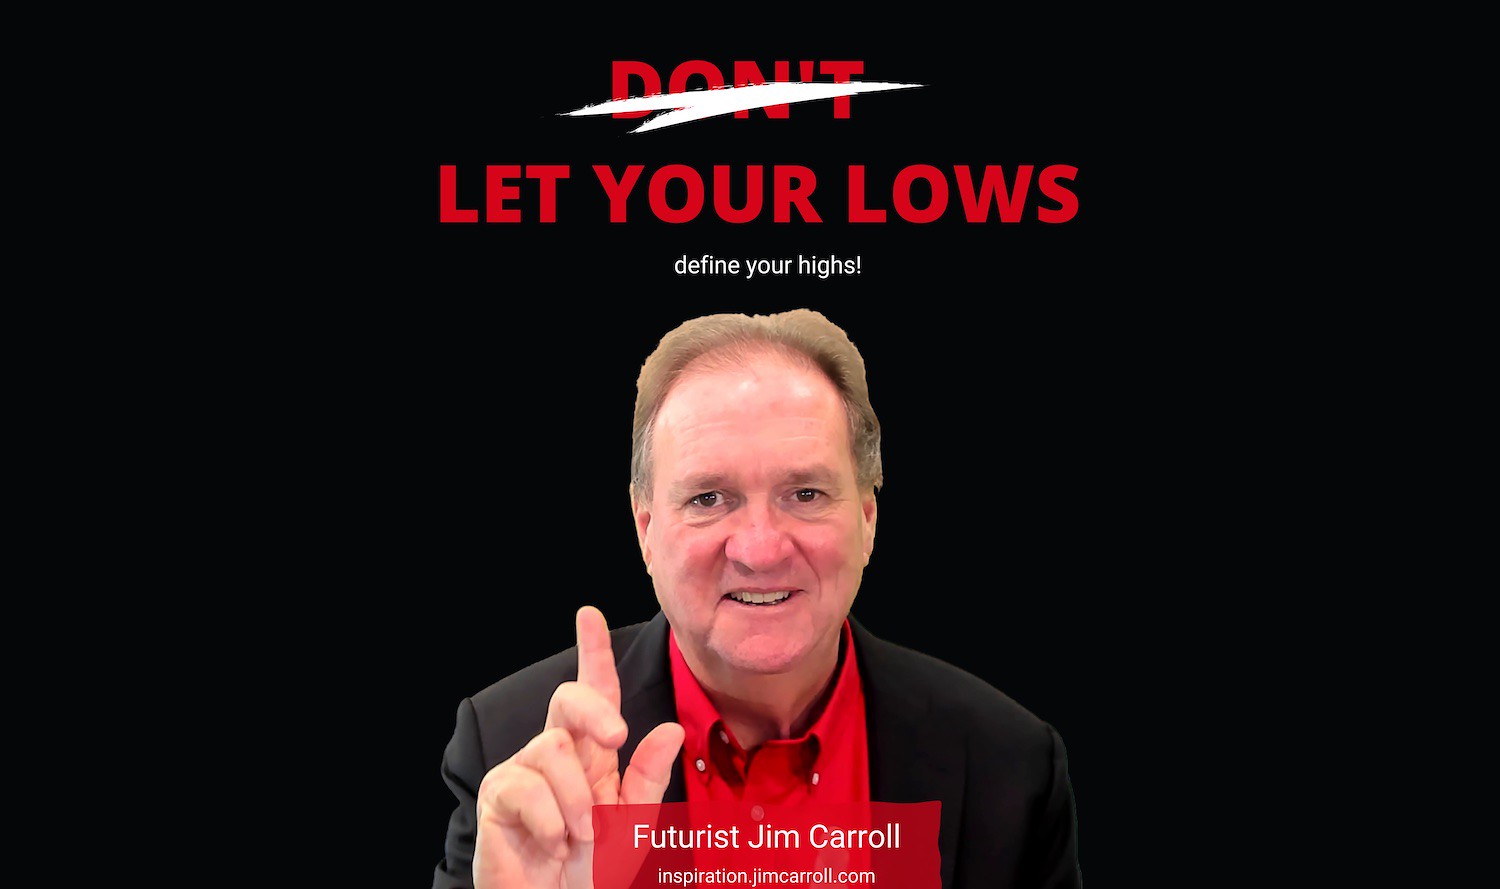 LetYo"Let your lows define your highs!" - Futurist Jim Carroll